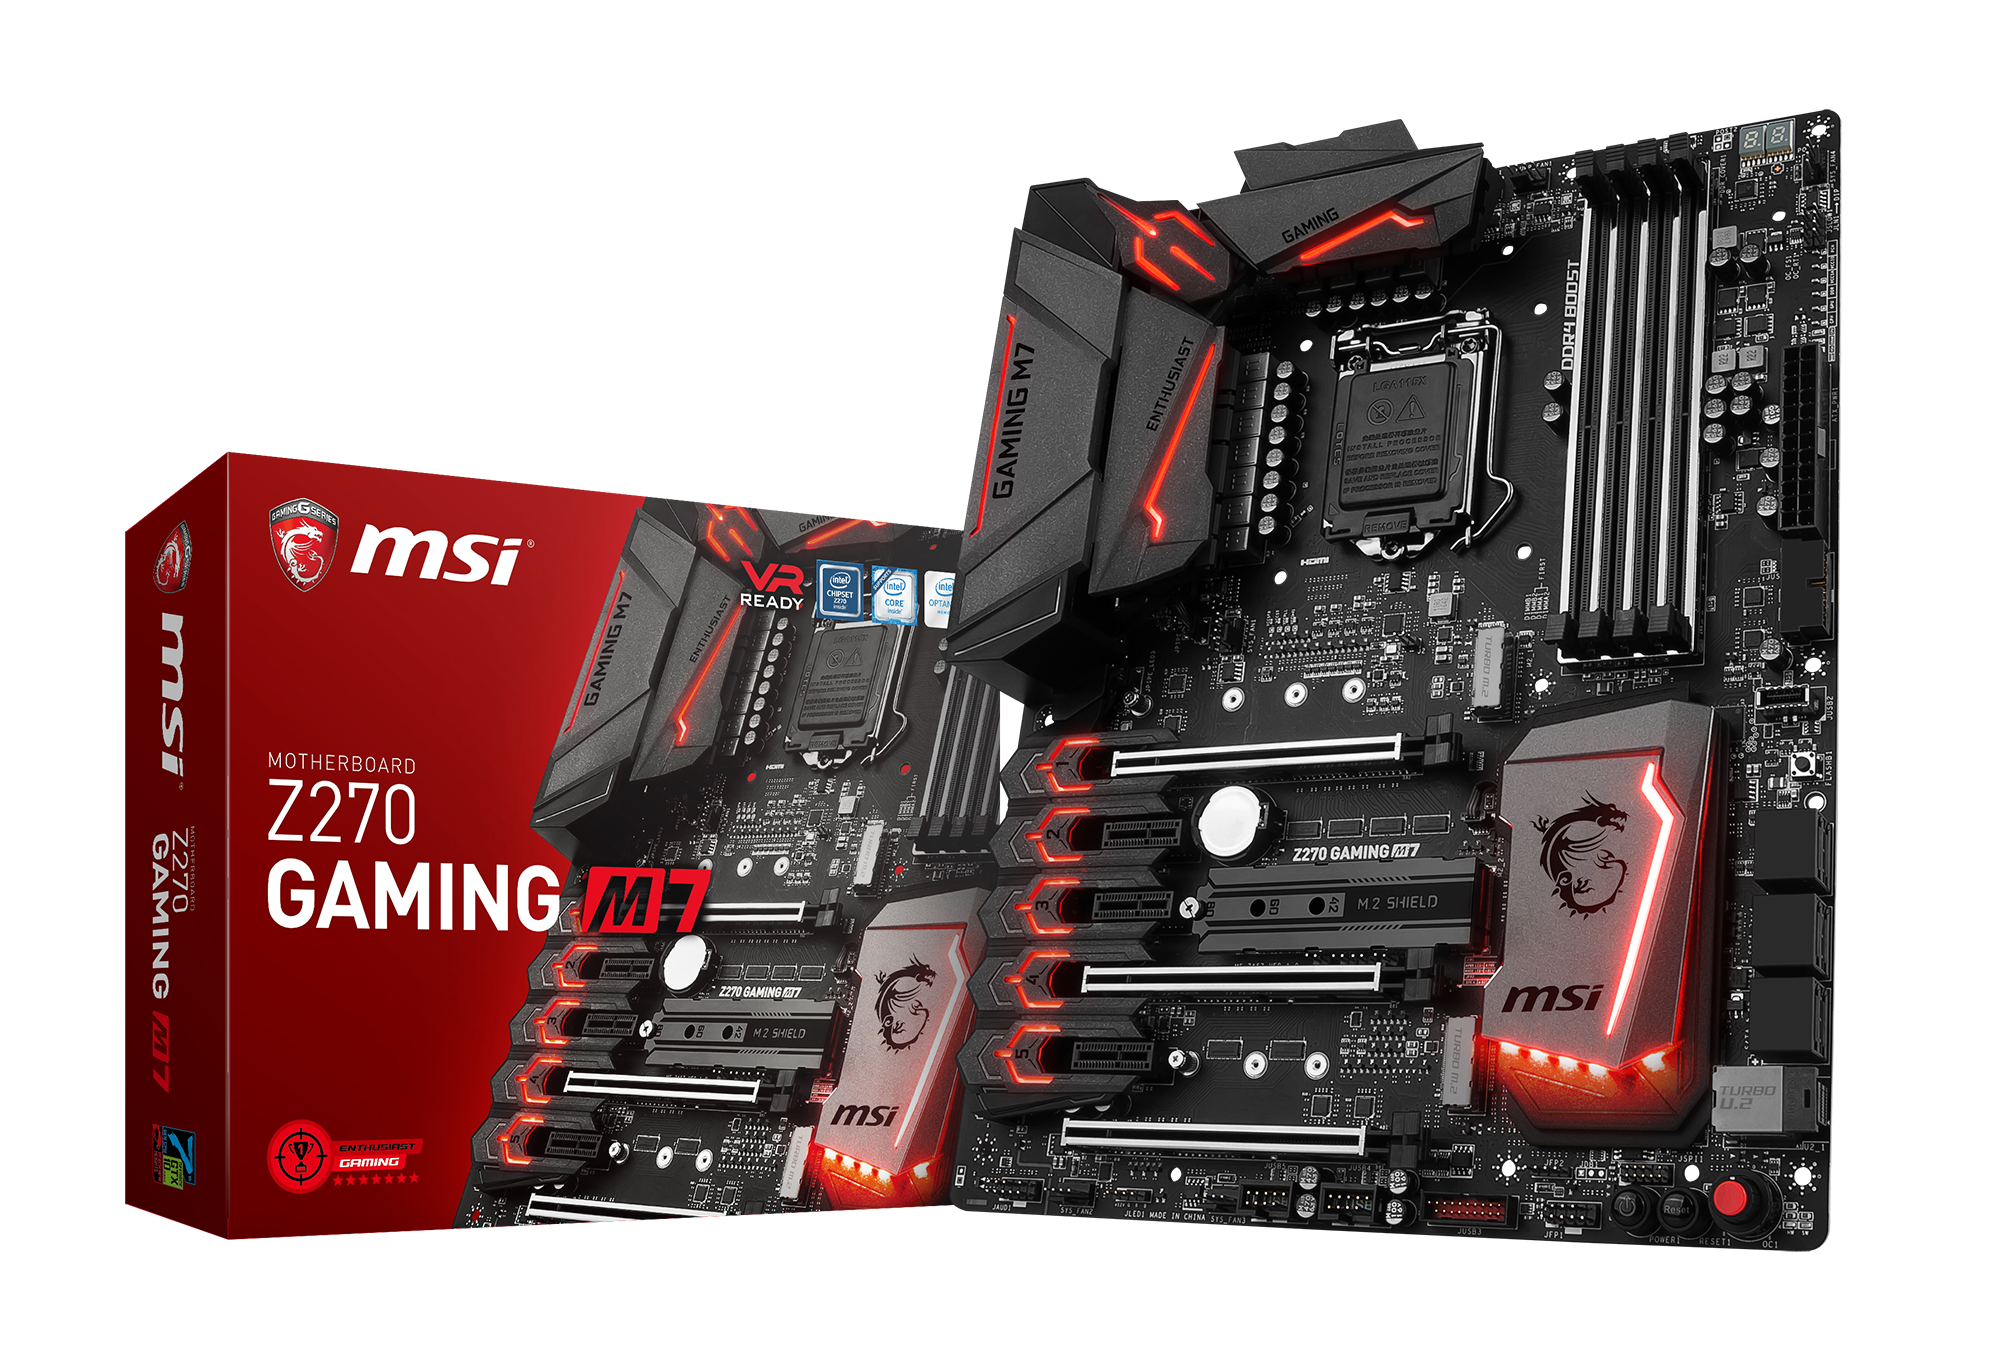 MSI Z270 GAMING M7 - Mainboard - ATX (7A57-001R) - Picture 1 of 1